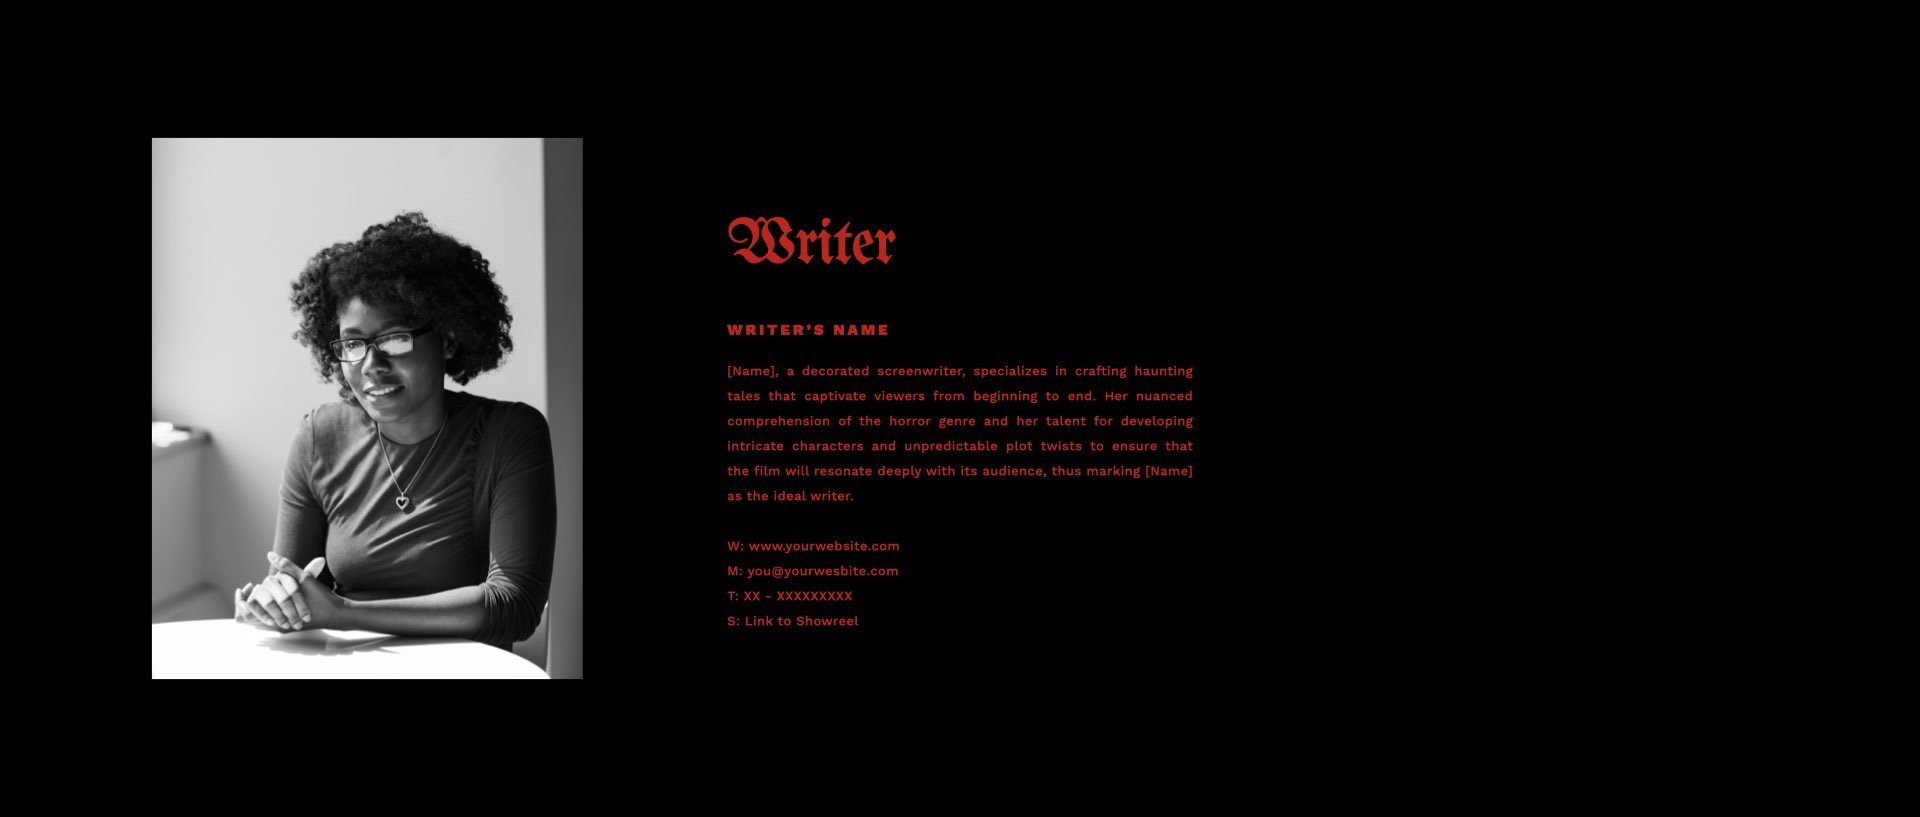 ‎Film Pitch Deck Template - Sinister Obsession.‎028.jpeg